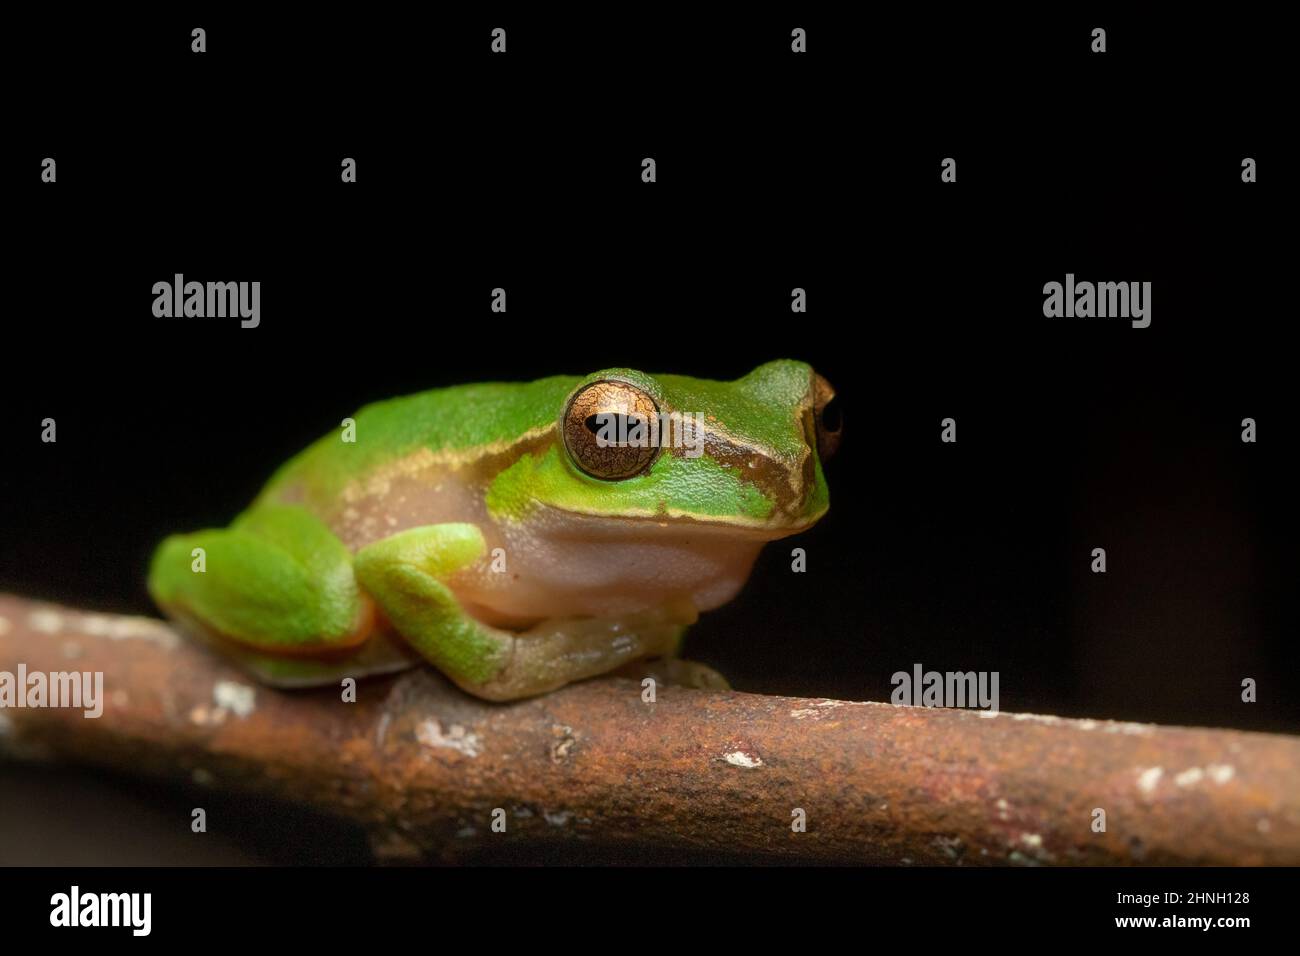 The vulnerable Pearson's stream frog (Litoria pearsoniana) sitting on a branch on a black background at night. Minyon Falls, NSW, Australia. Stock Photo